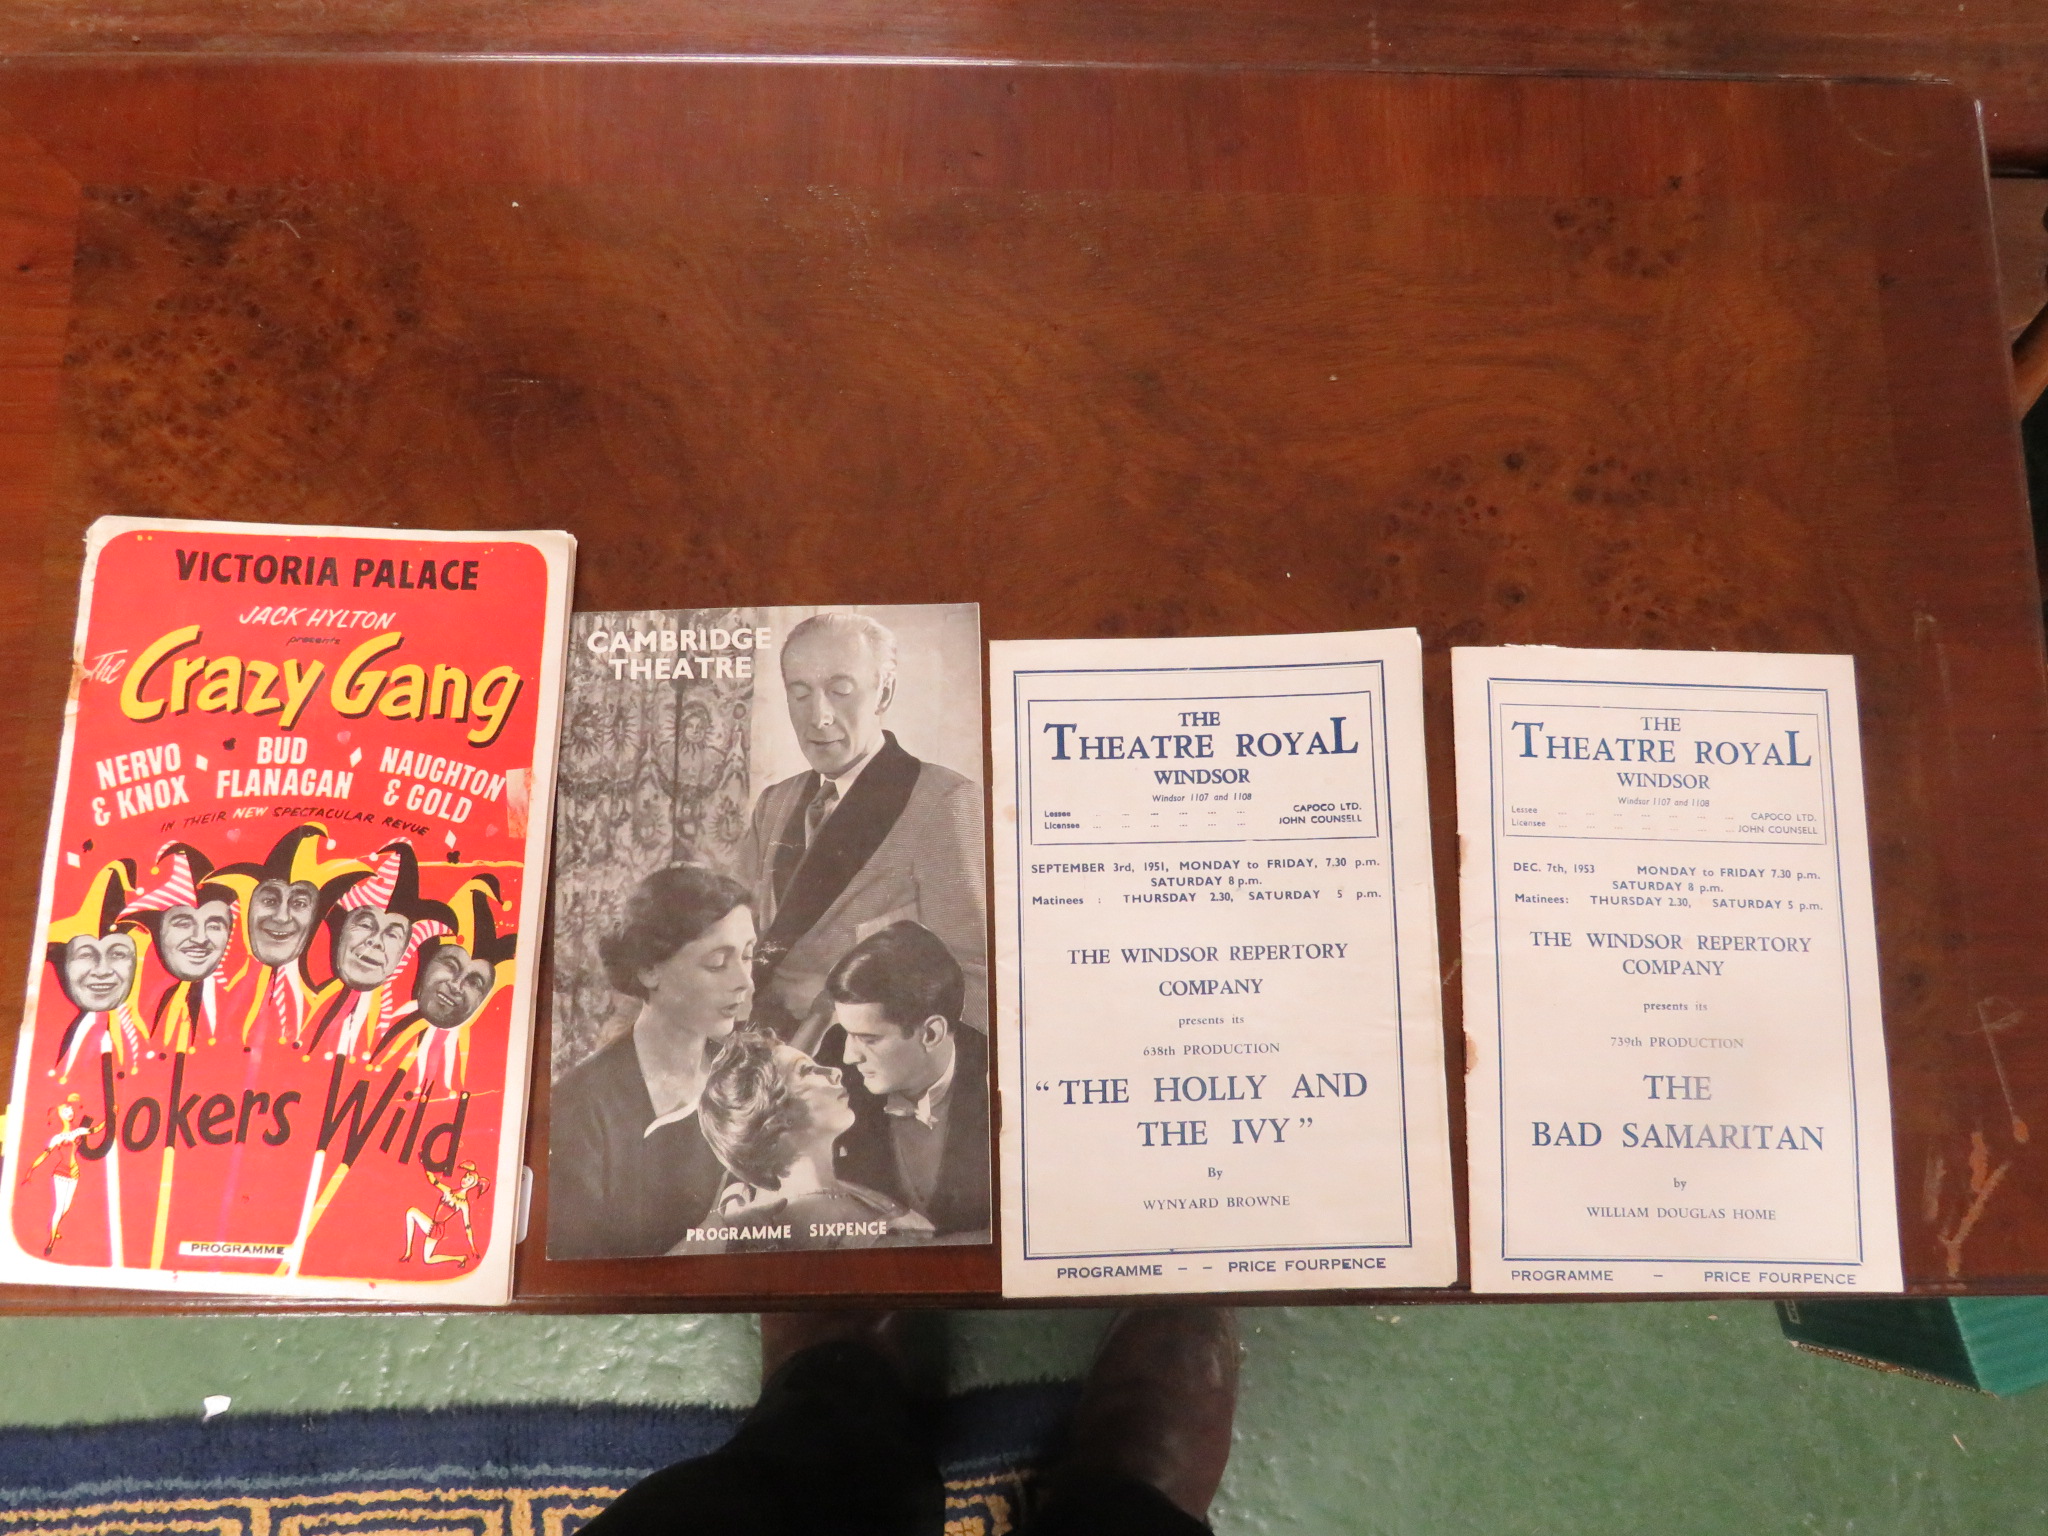 SELECTION OF VINTAGE MOTOR RACING PAMPHLETS AND GUIDES, TOGETHER WITH THEATRE PROGRAMS - Image 4 of 4